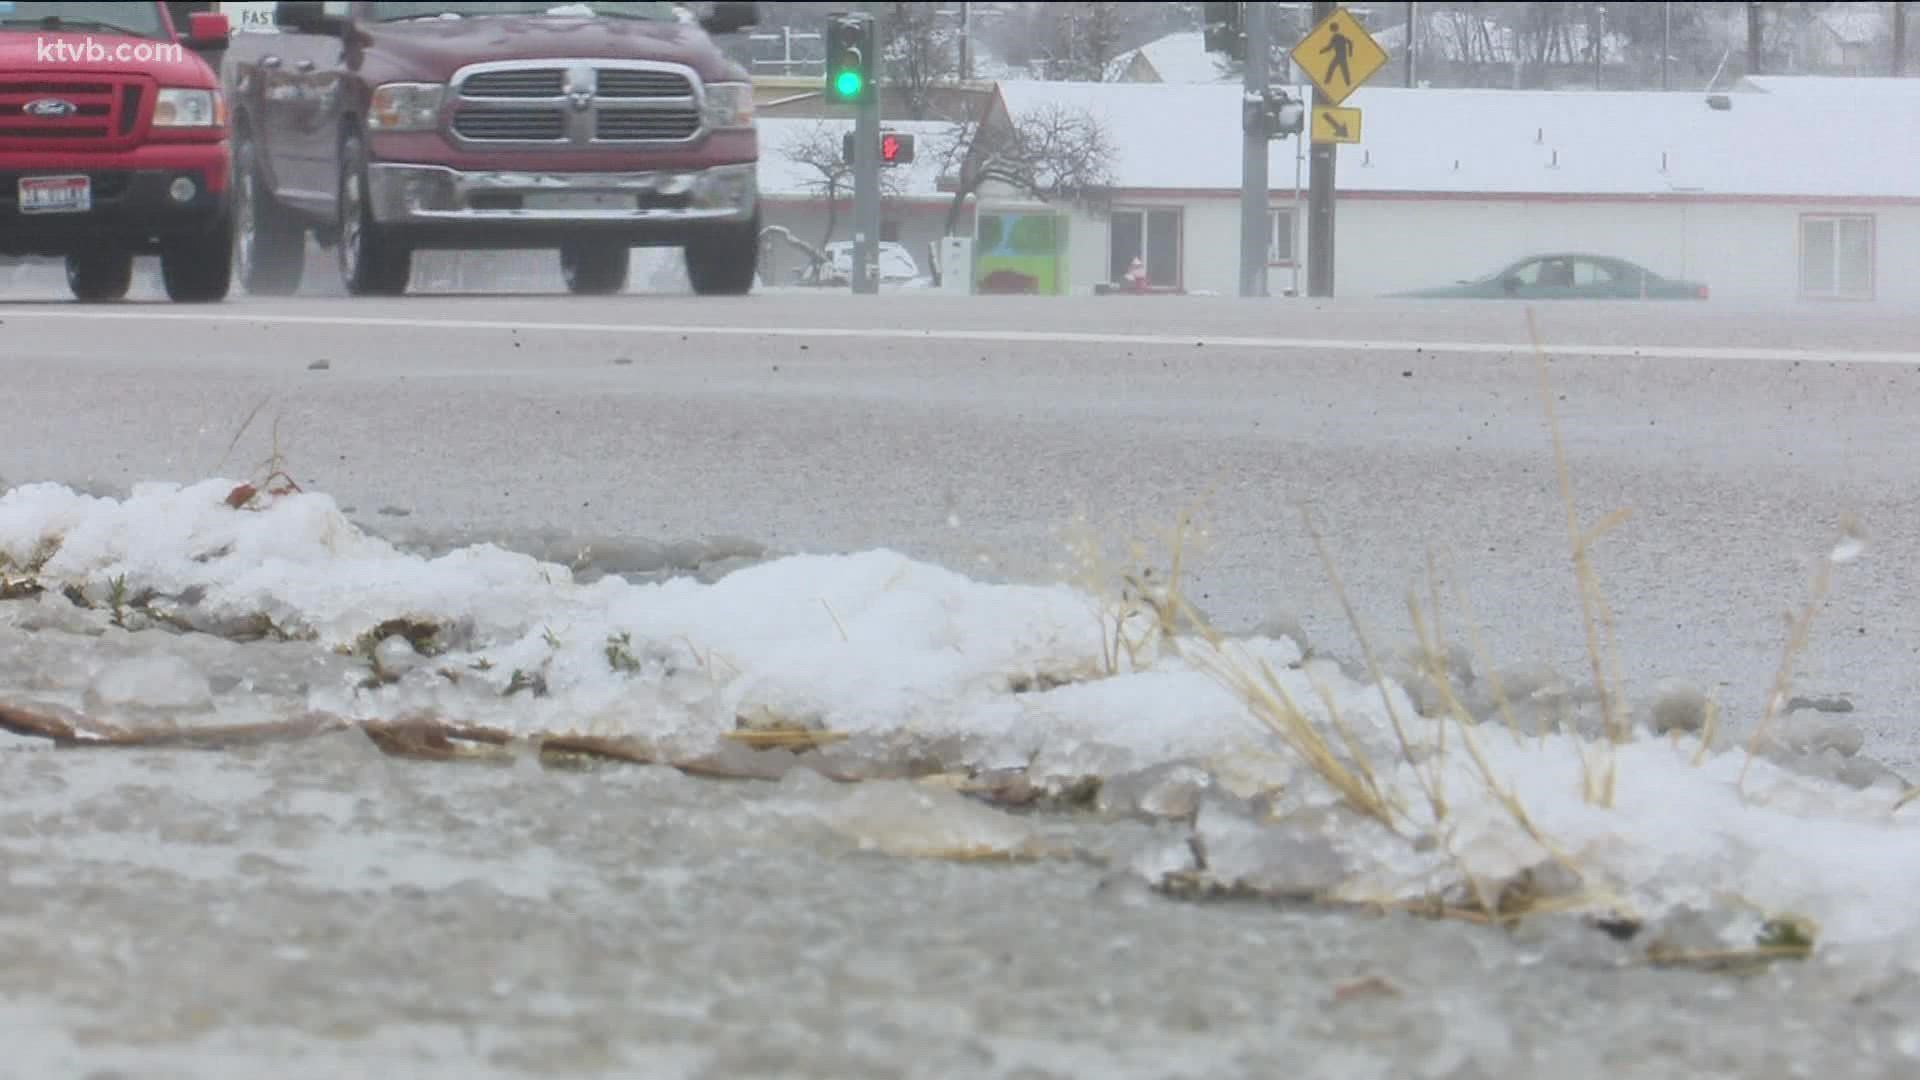 Wintry conditions rolled into the Boise area on Tuesday.